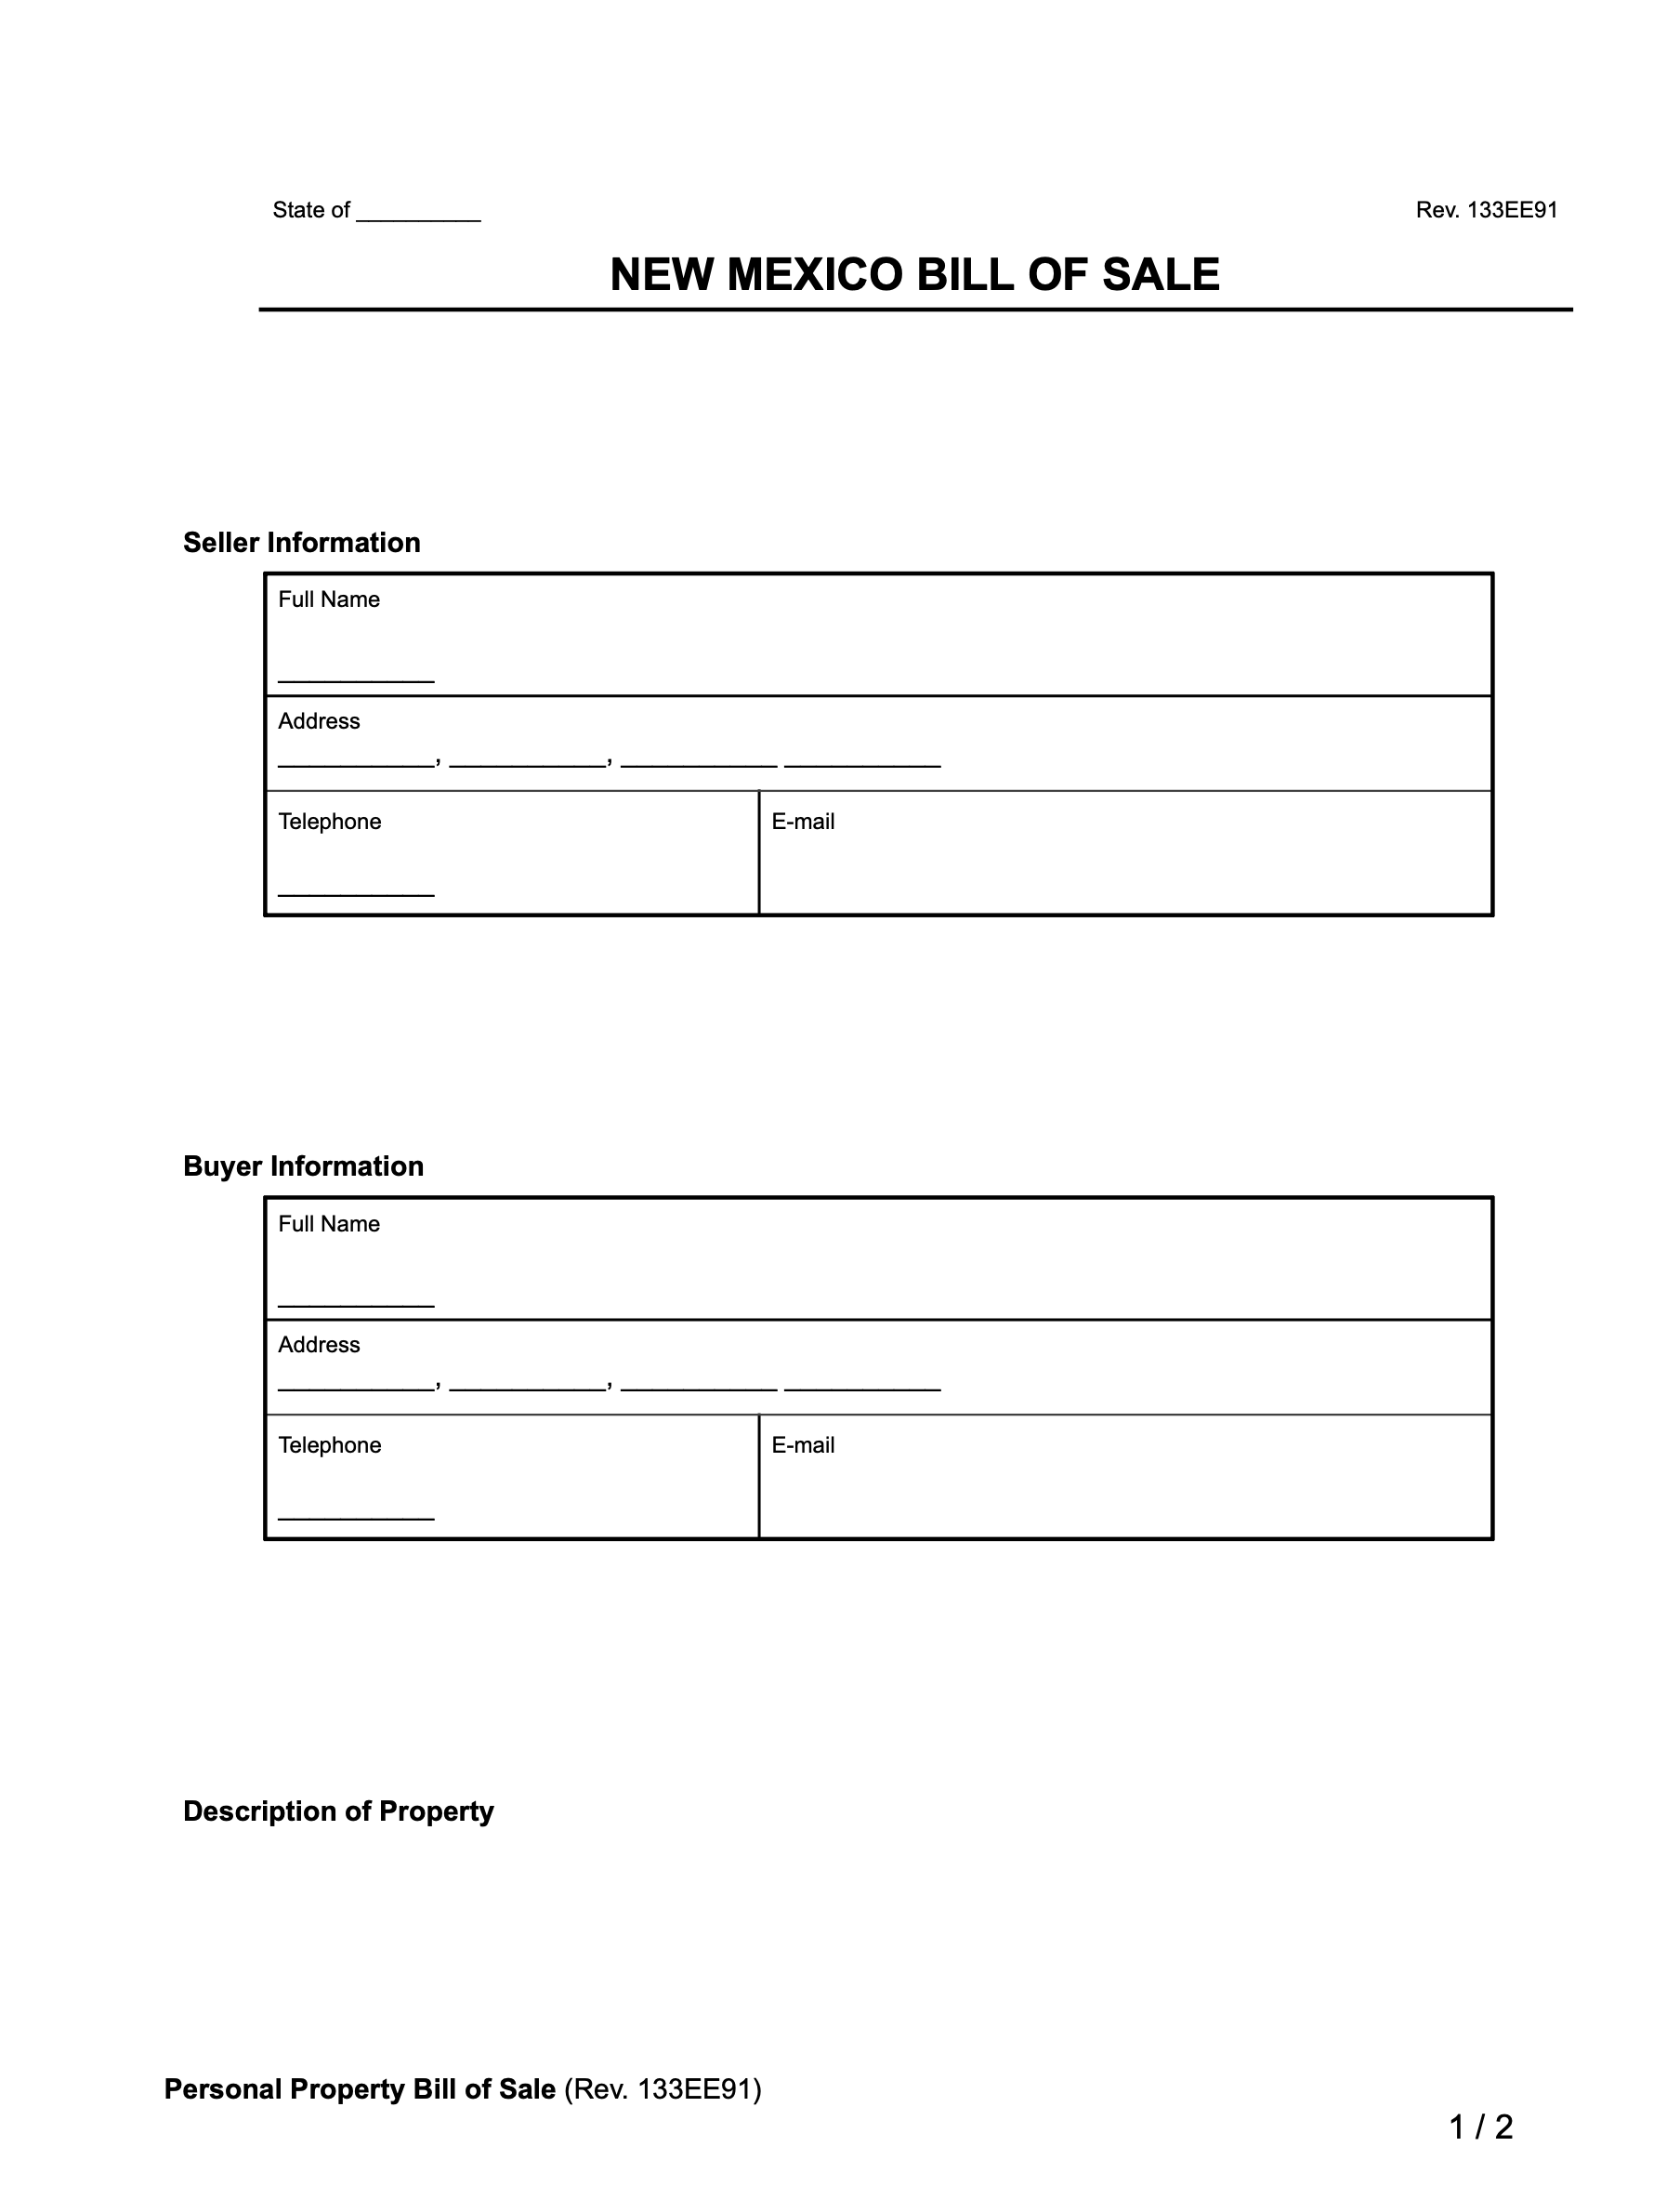 new mexico bill of sale